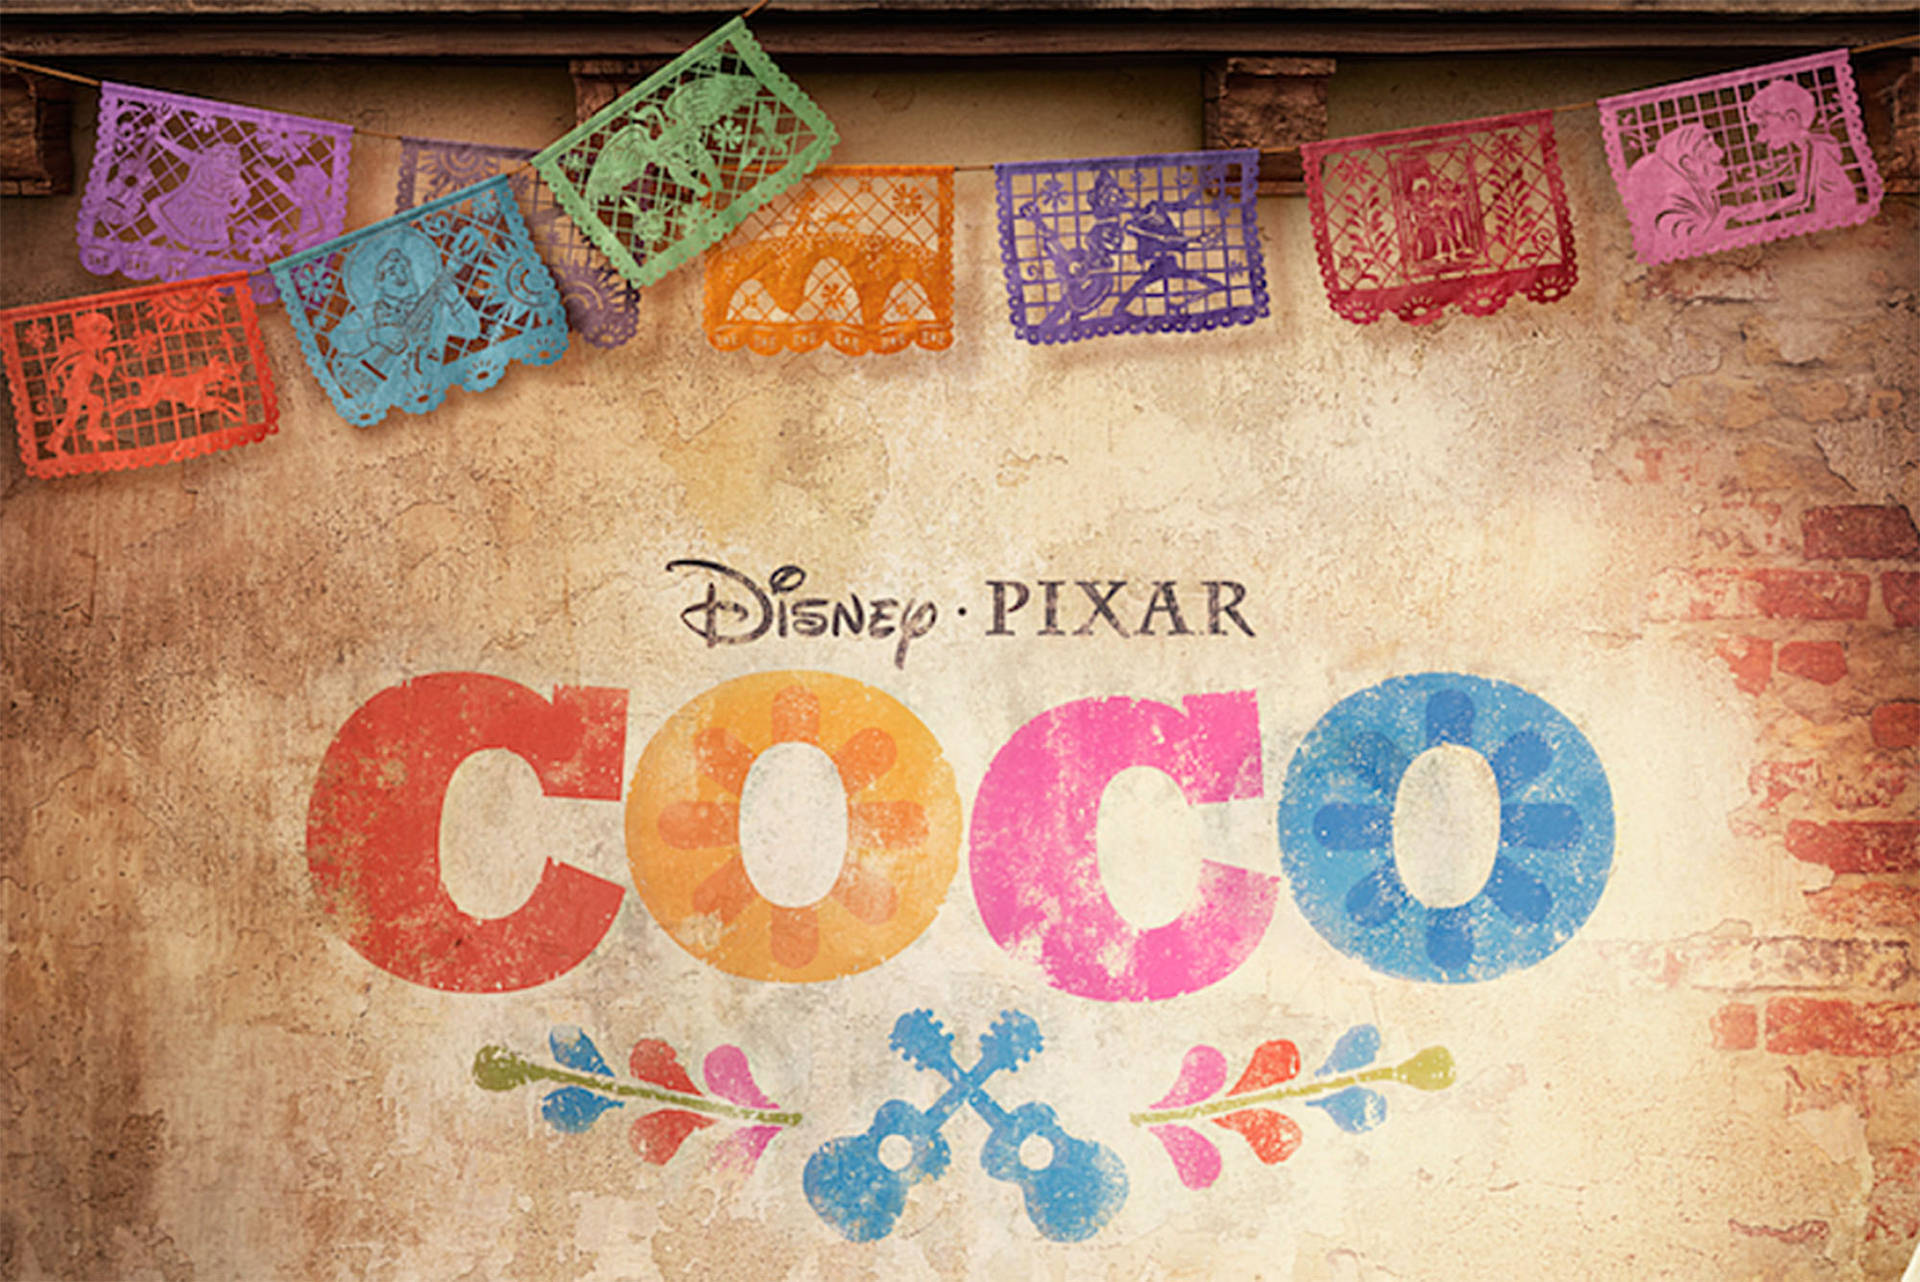 Coco 2000X1335 Wallpaper and Background Image